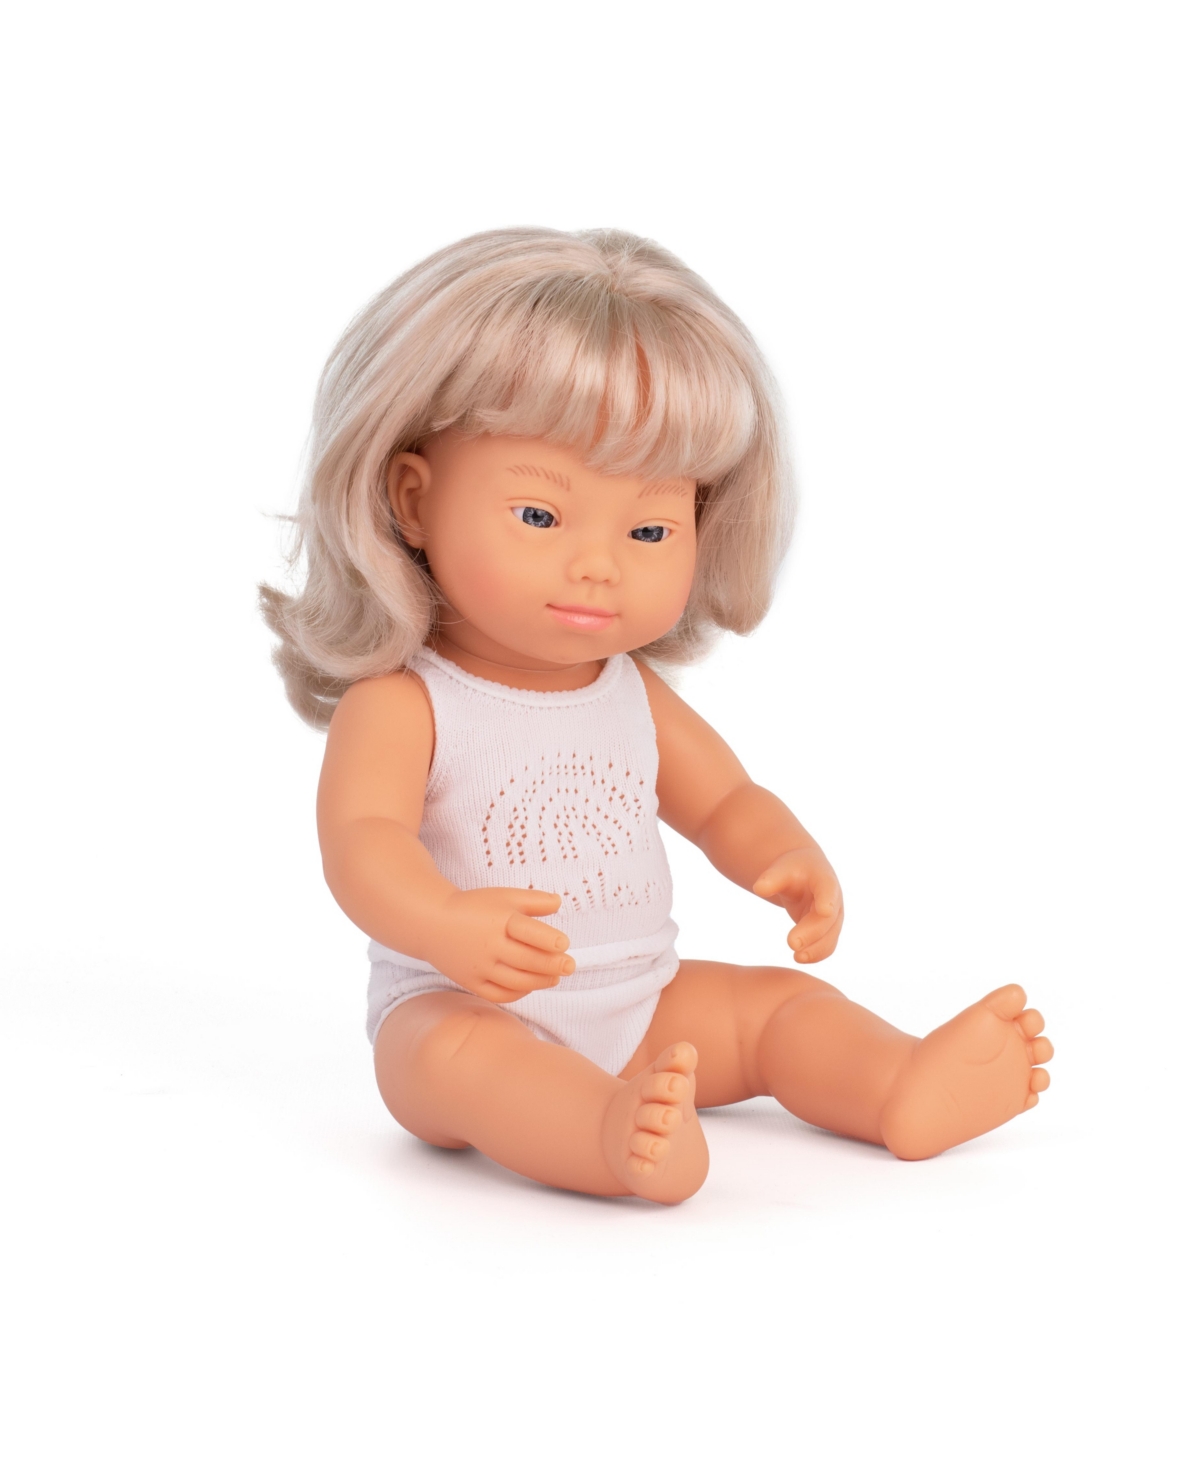 Miniland Kids' Baby Girl 15" Caucasian Blond Doll With Down Syndrome In Multicolor